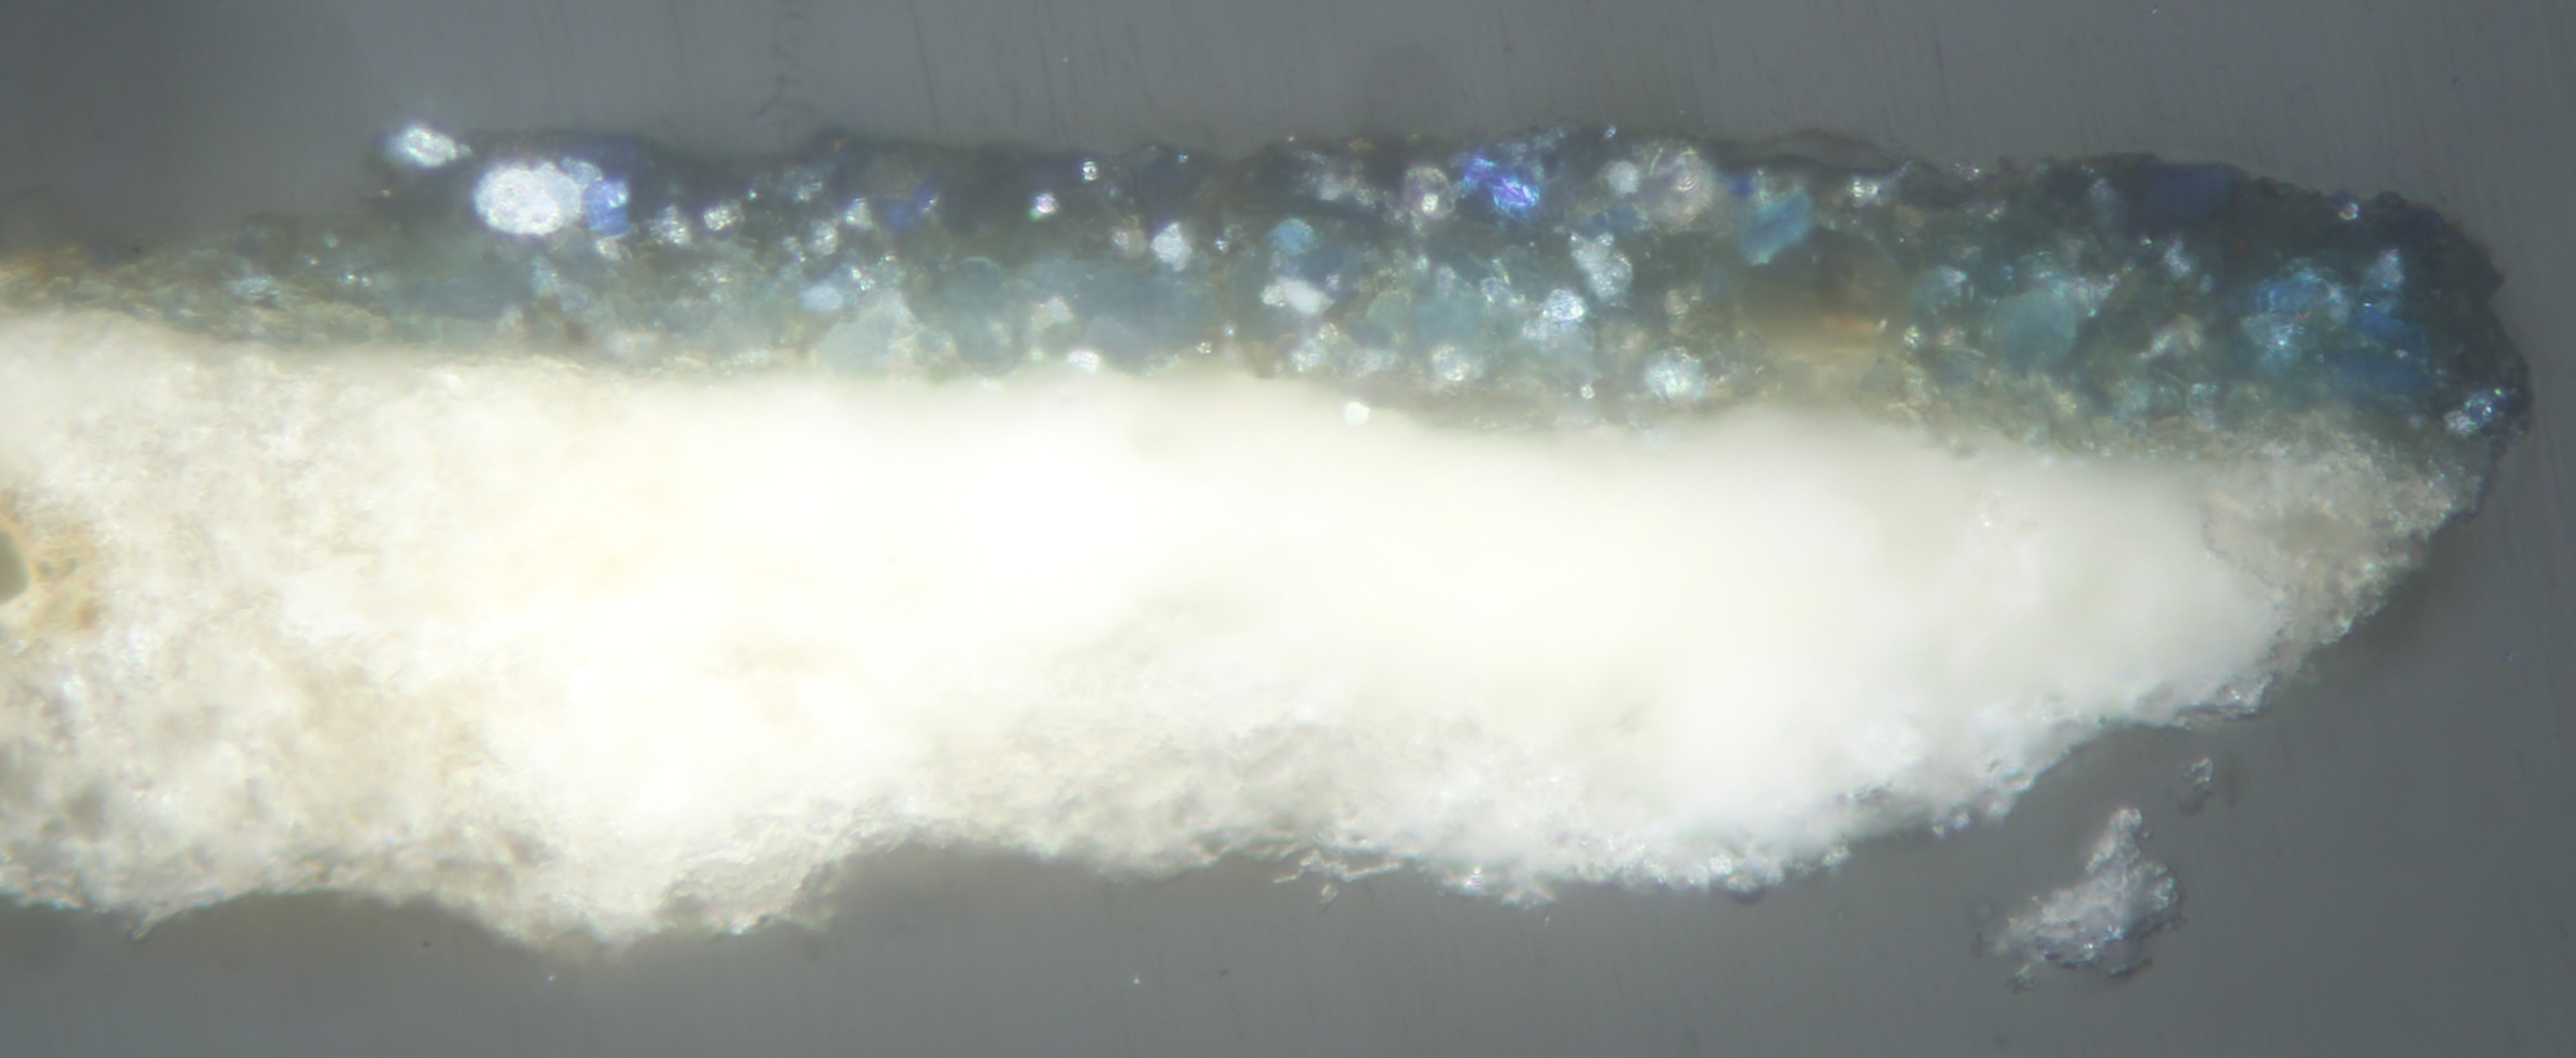 Sample from the dress, showing coarse azurite particles  (© van Dorst)